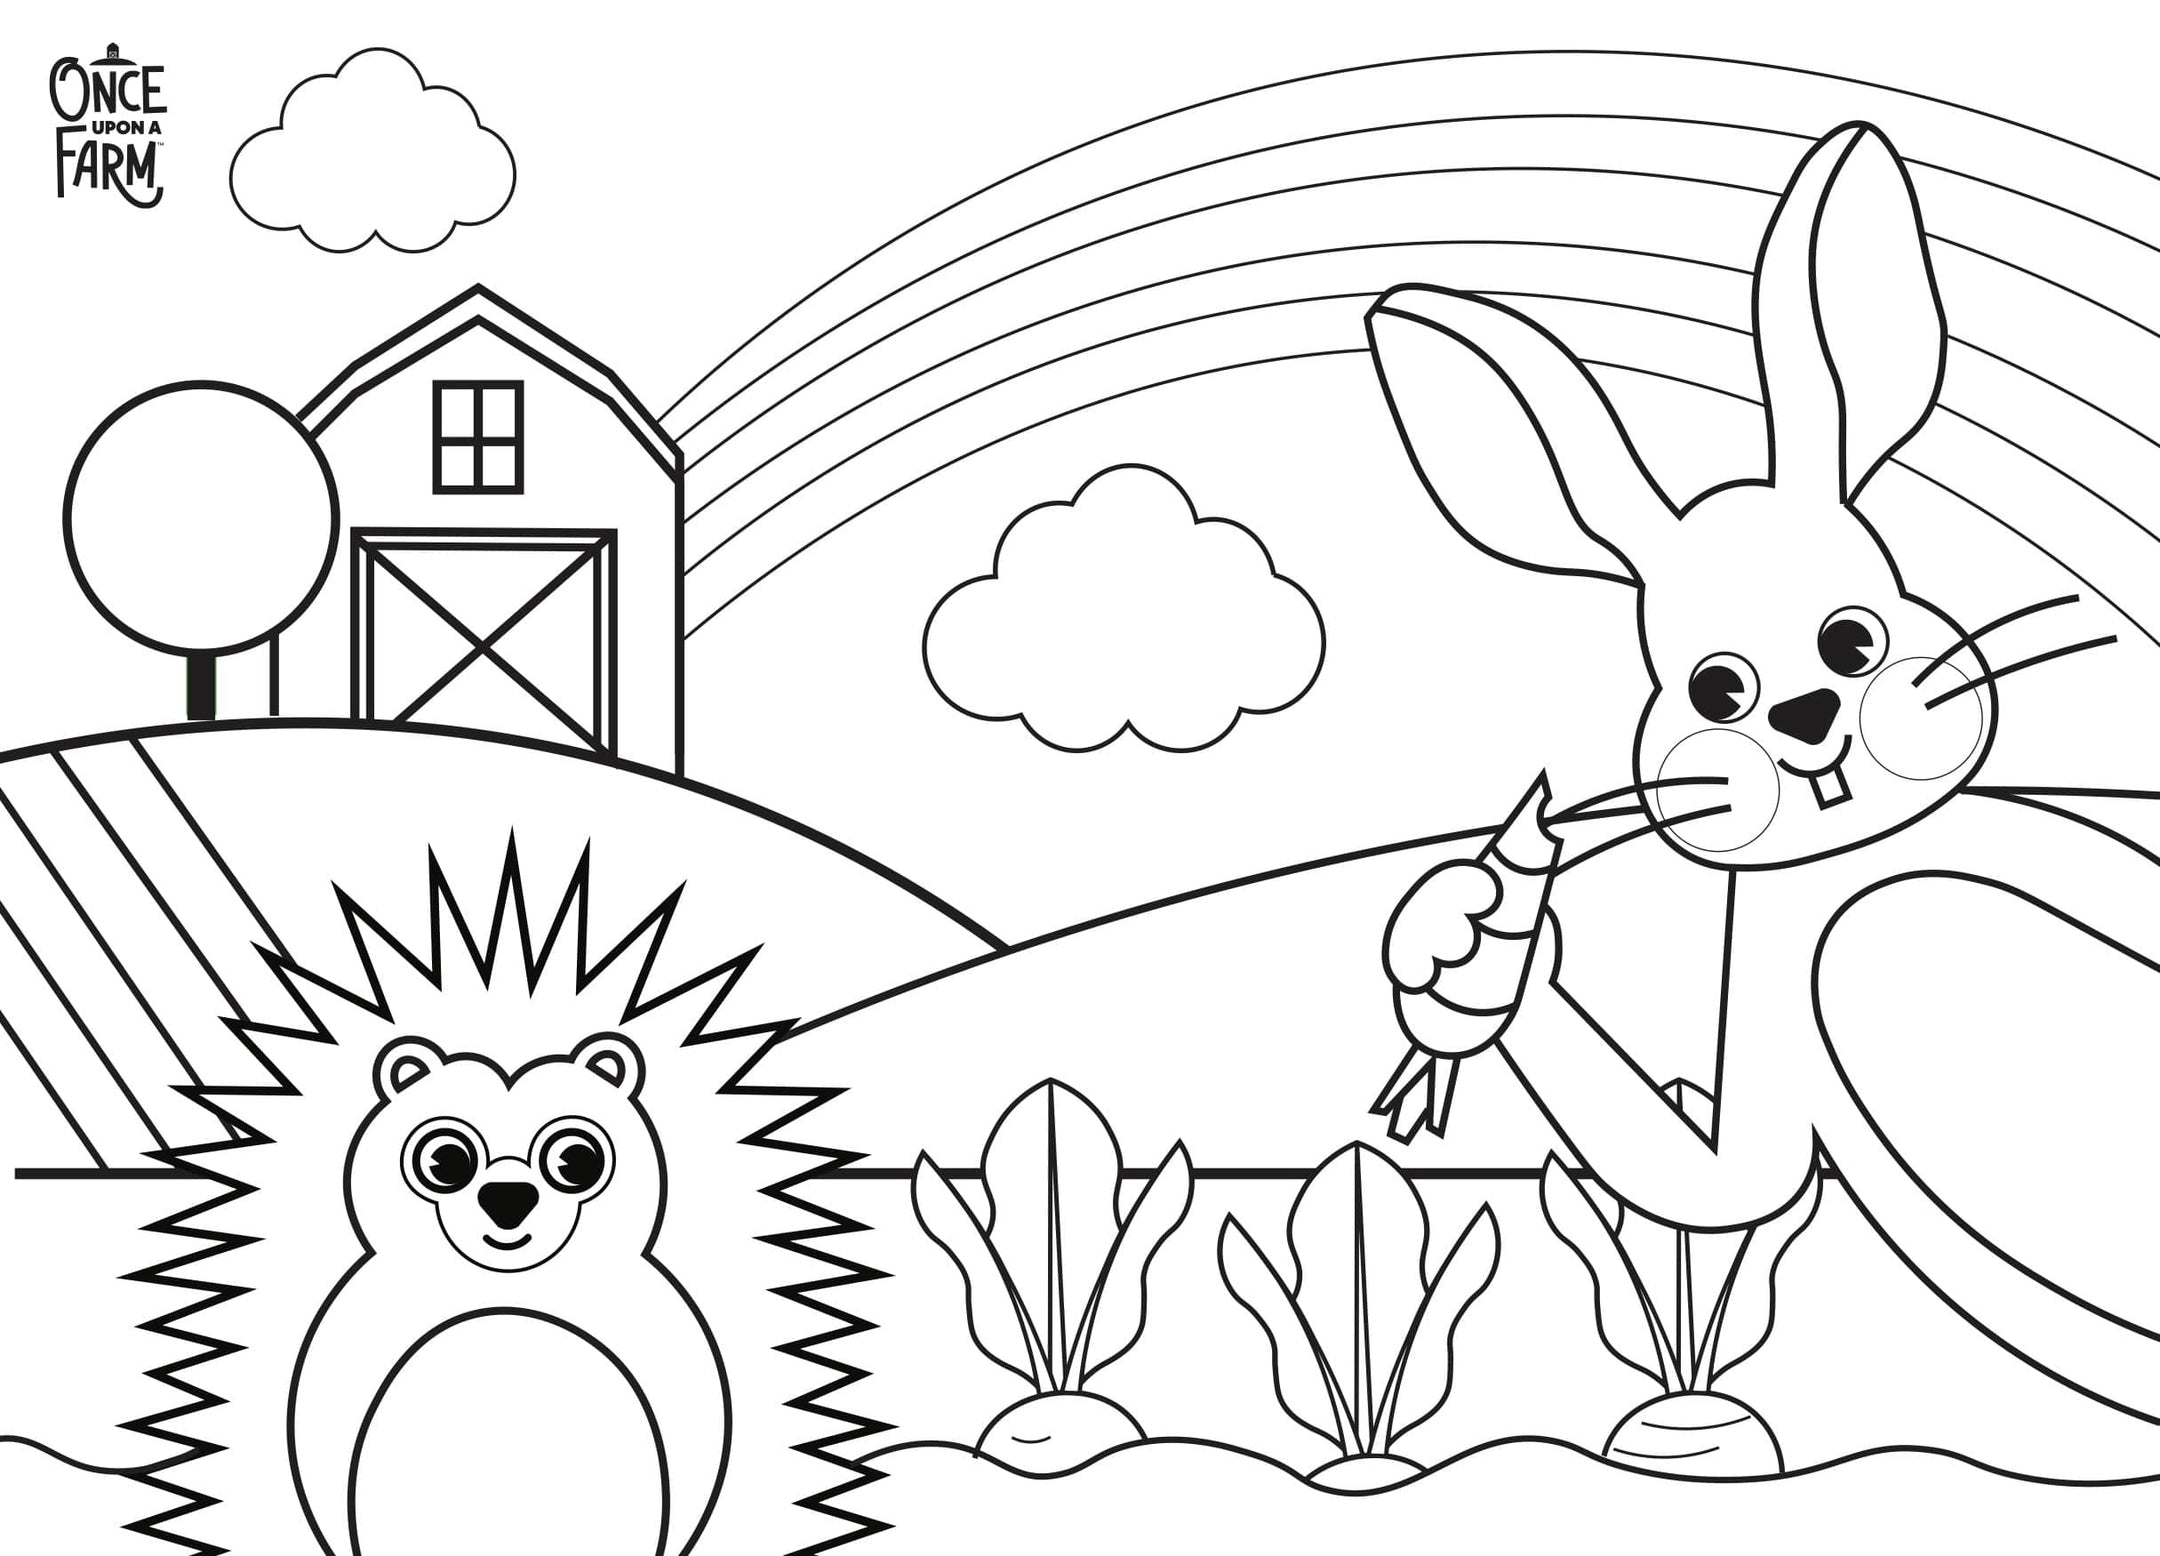 Spring on the Farm Coloring Page